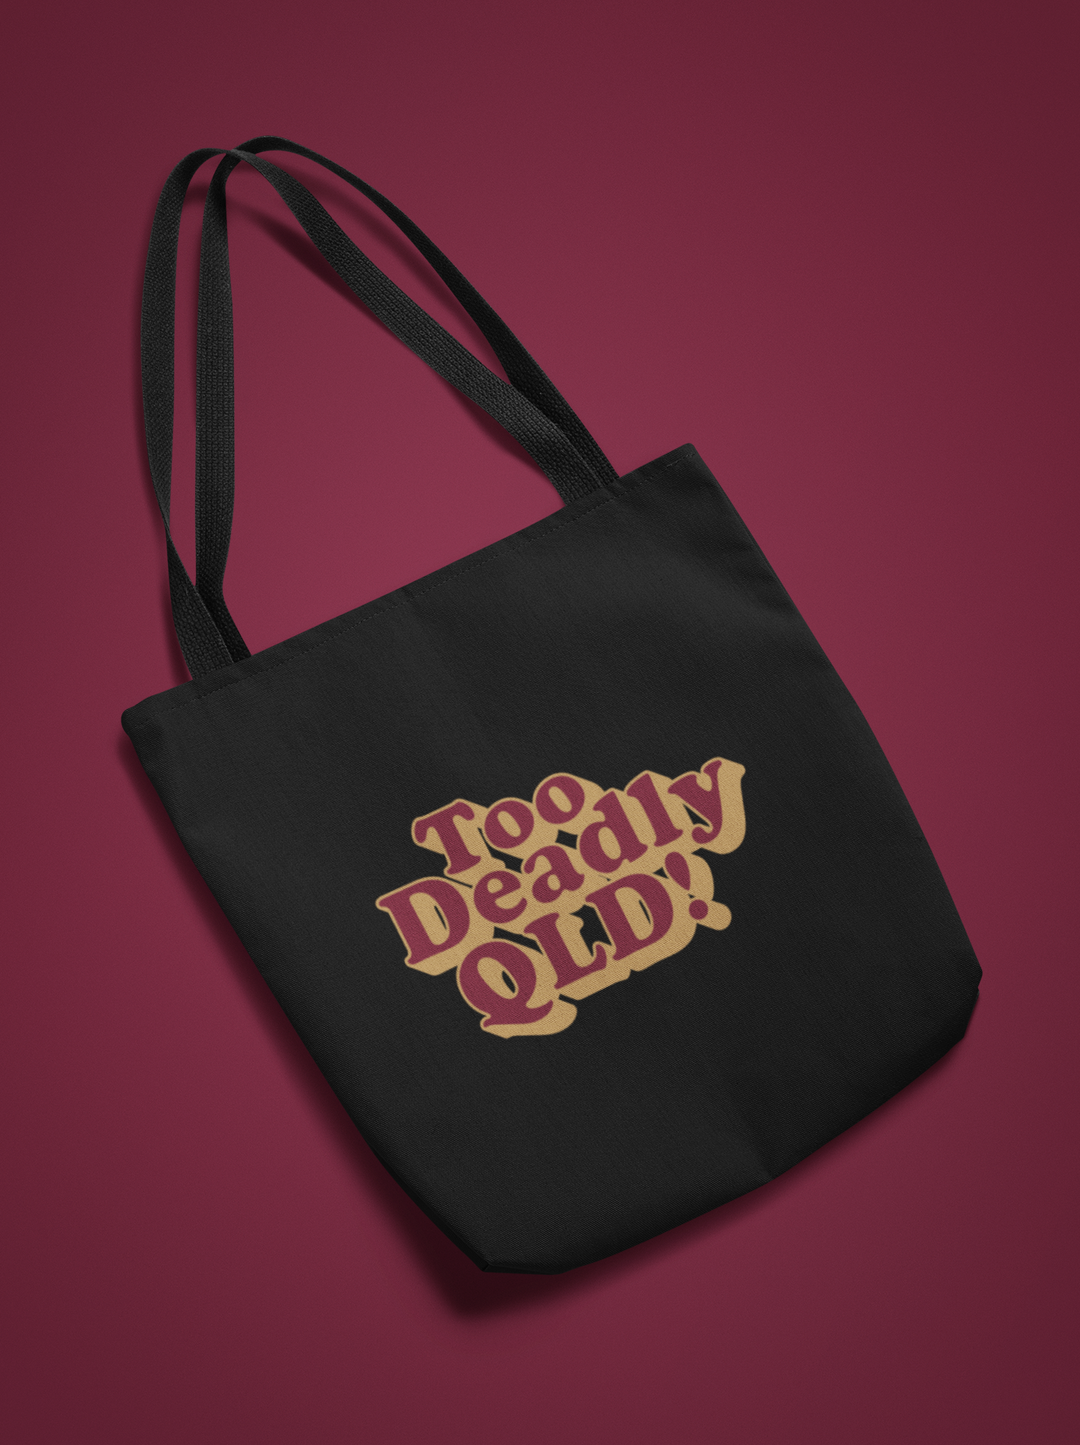 Too Deadly (Maroon & Gold) - Cotton Tote Bag